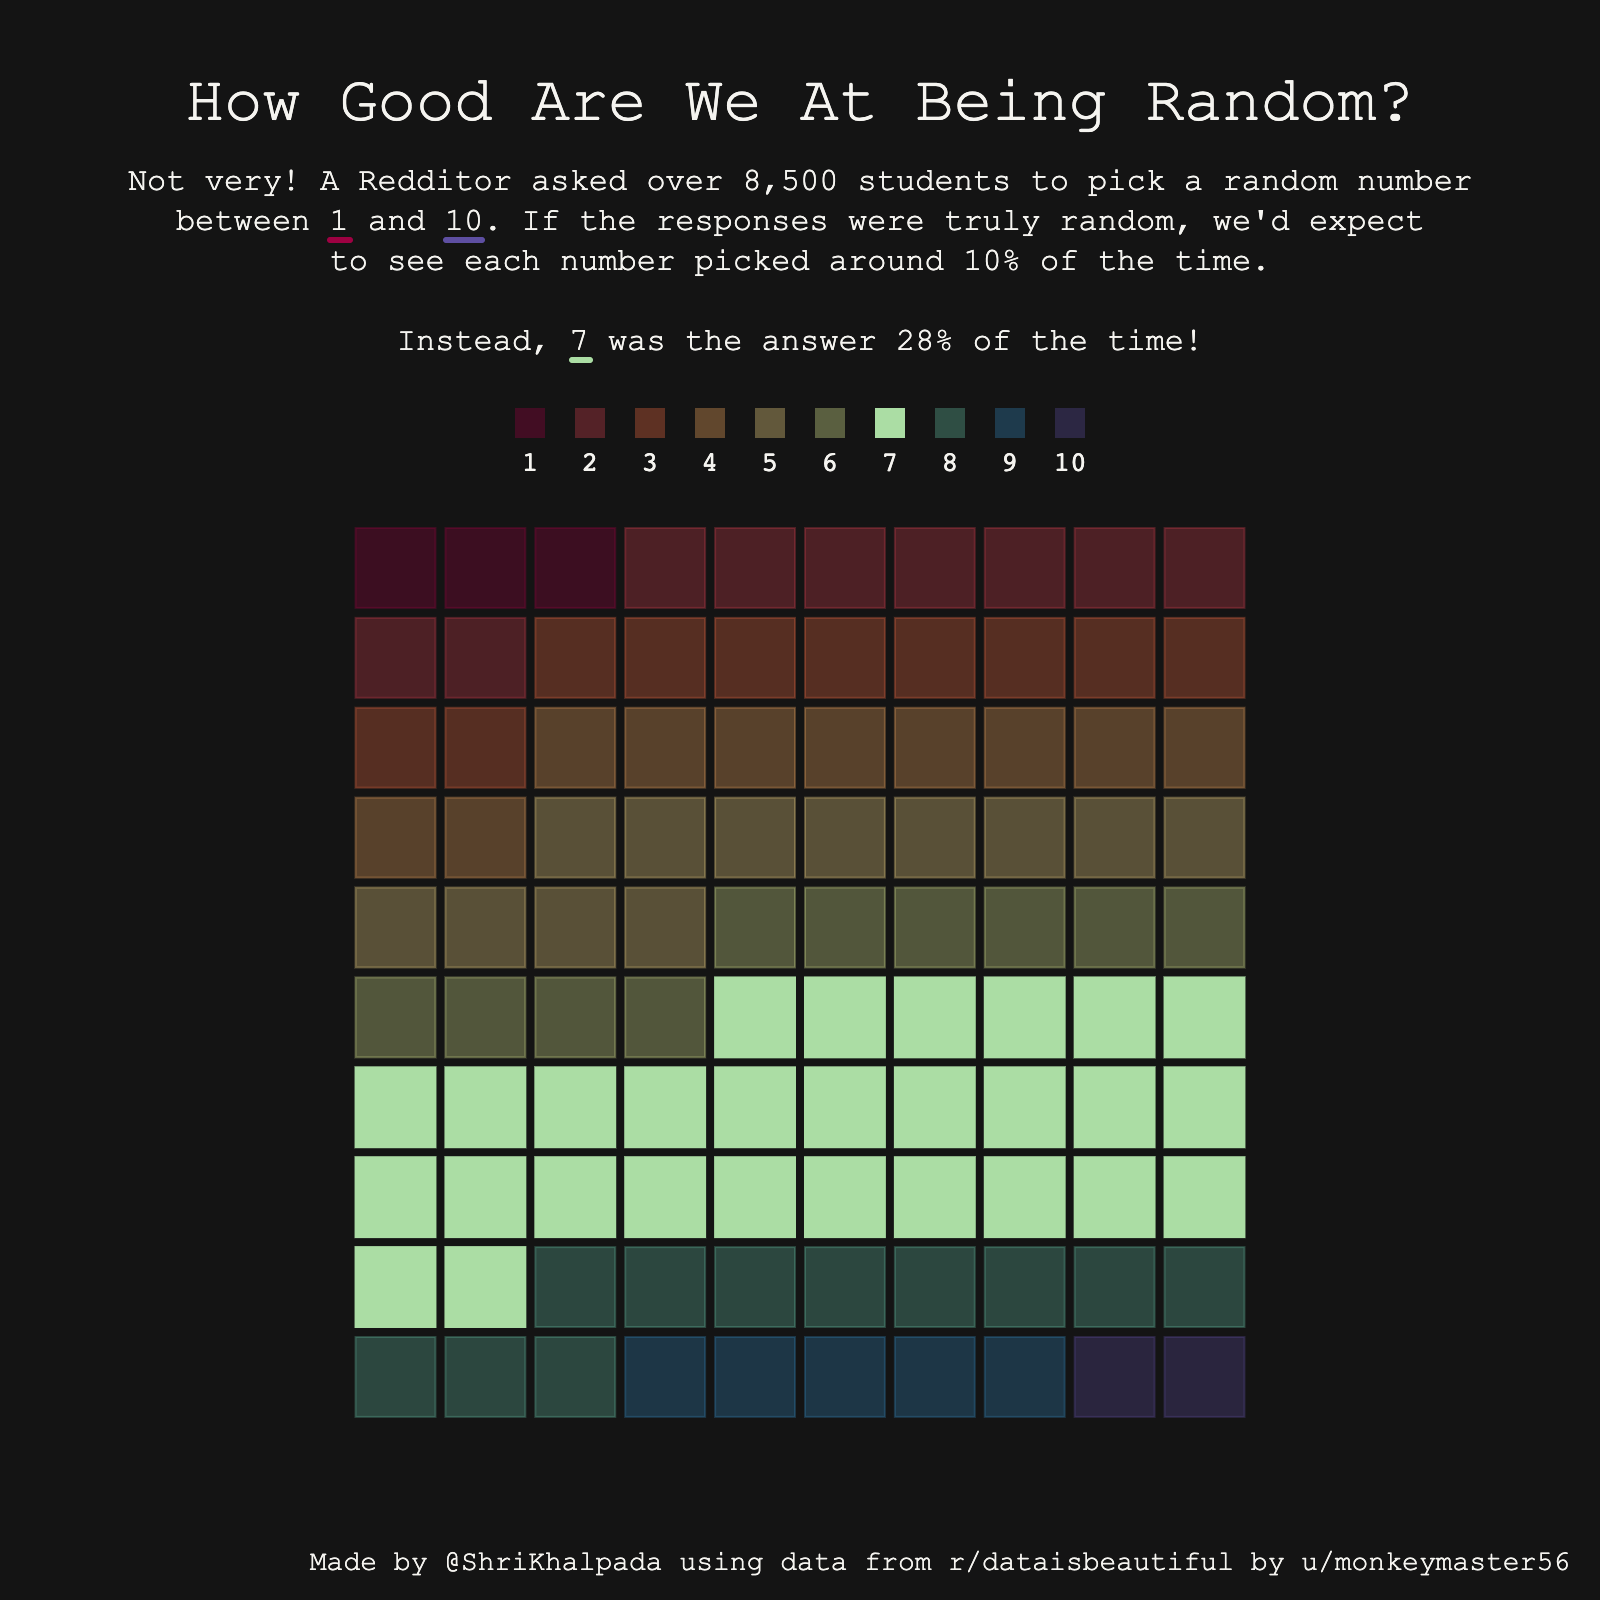 A grid representation titled "How Good Are We At Being Random?" showing that the number 7 was chosen disproportionately more often than other numbers when people were asked to pick a random number between 1 and 10.